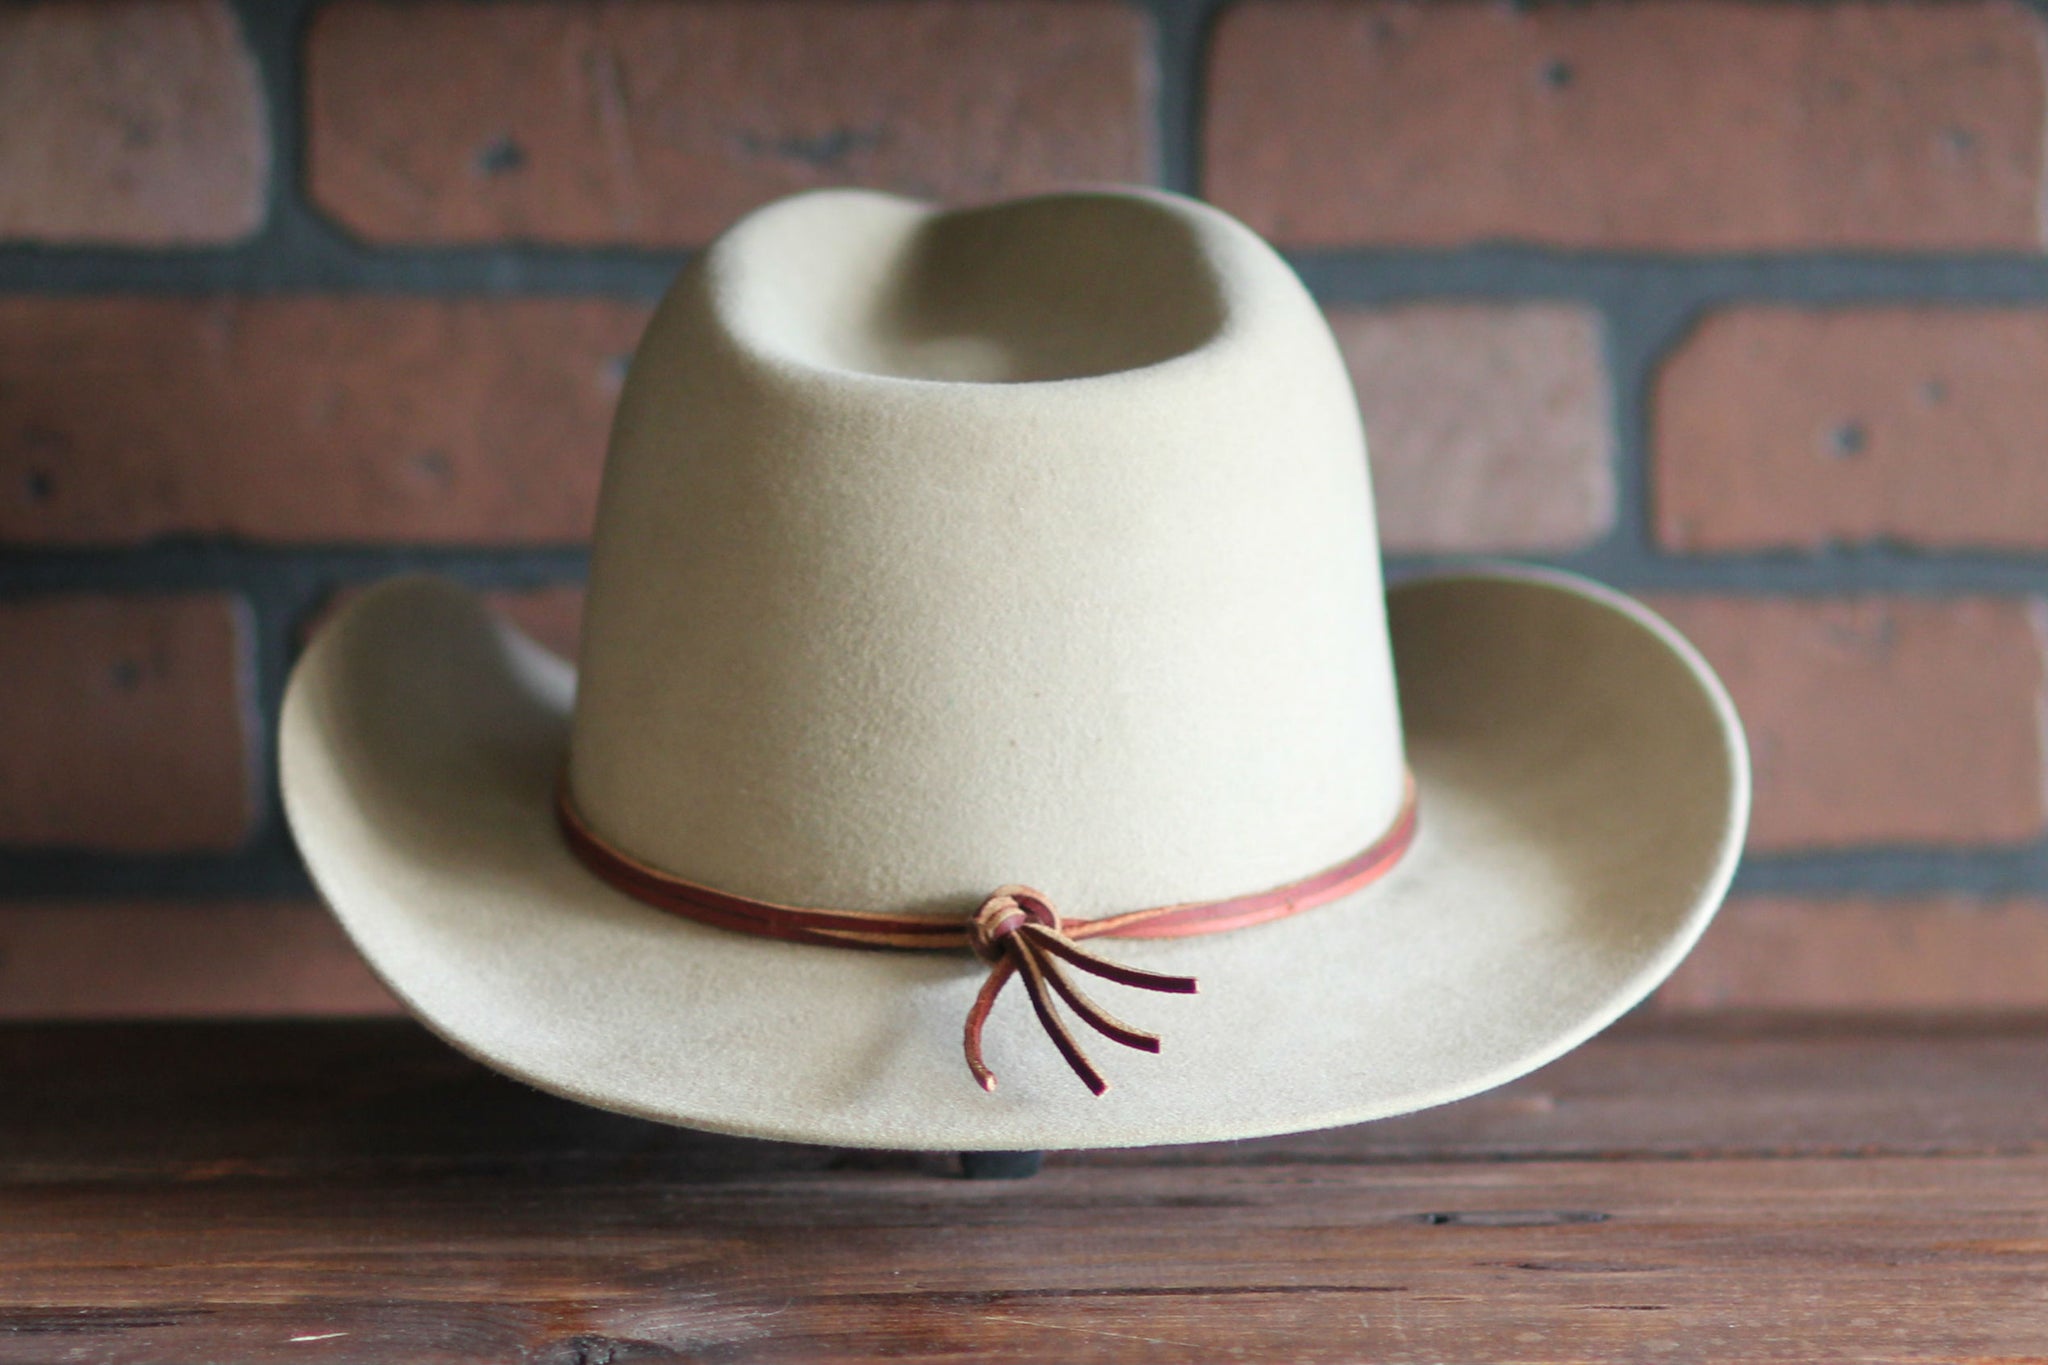 Replica western hat worn inspired by Robert Duvall's character in the film "Open Range"